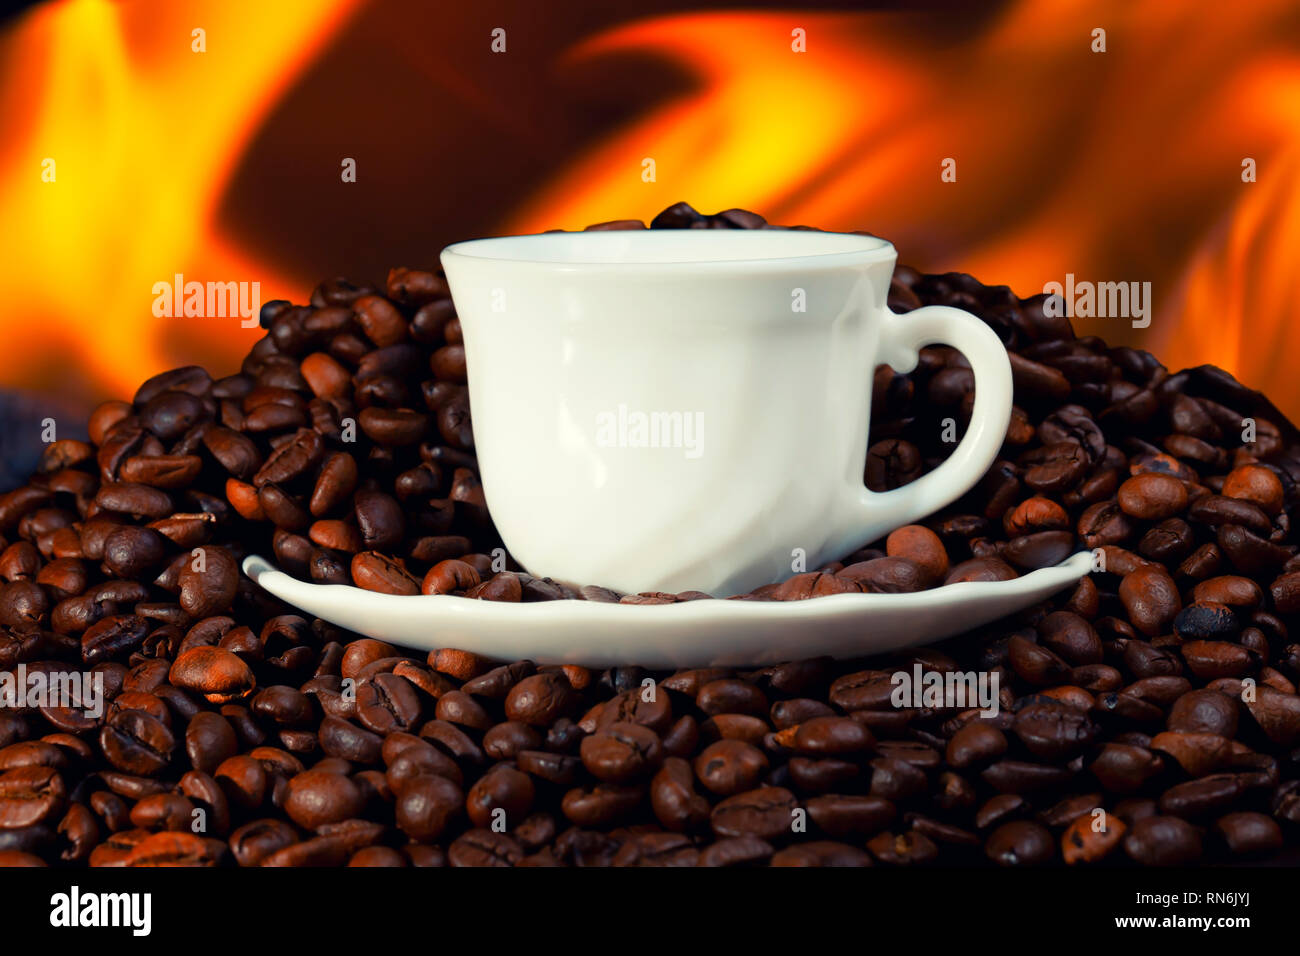 A white cup on top of a pile of roasted coffee beans with fire in the background. Stock Photo